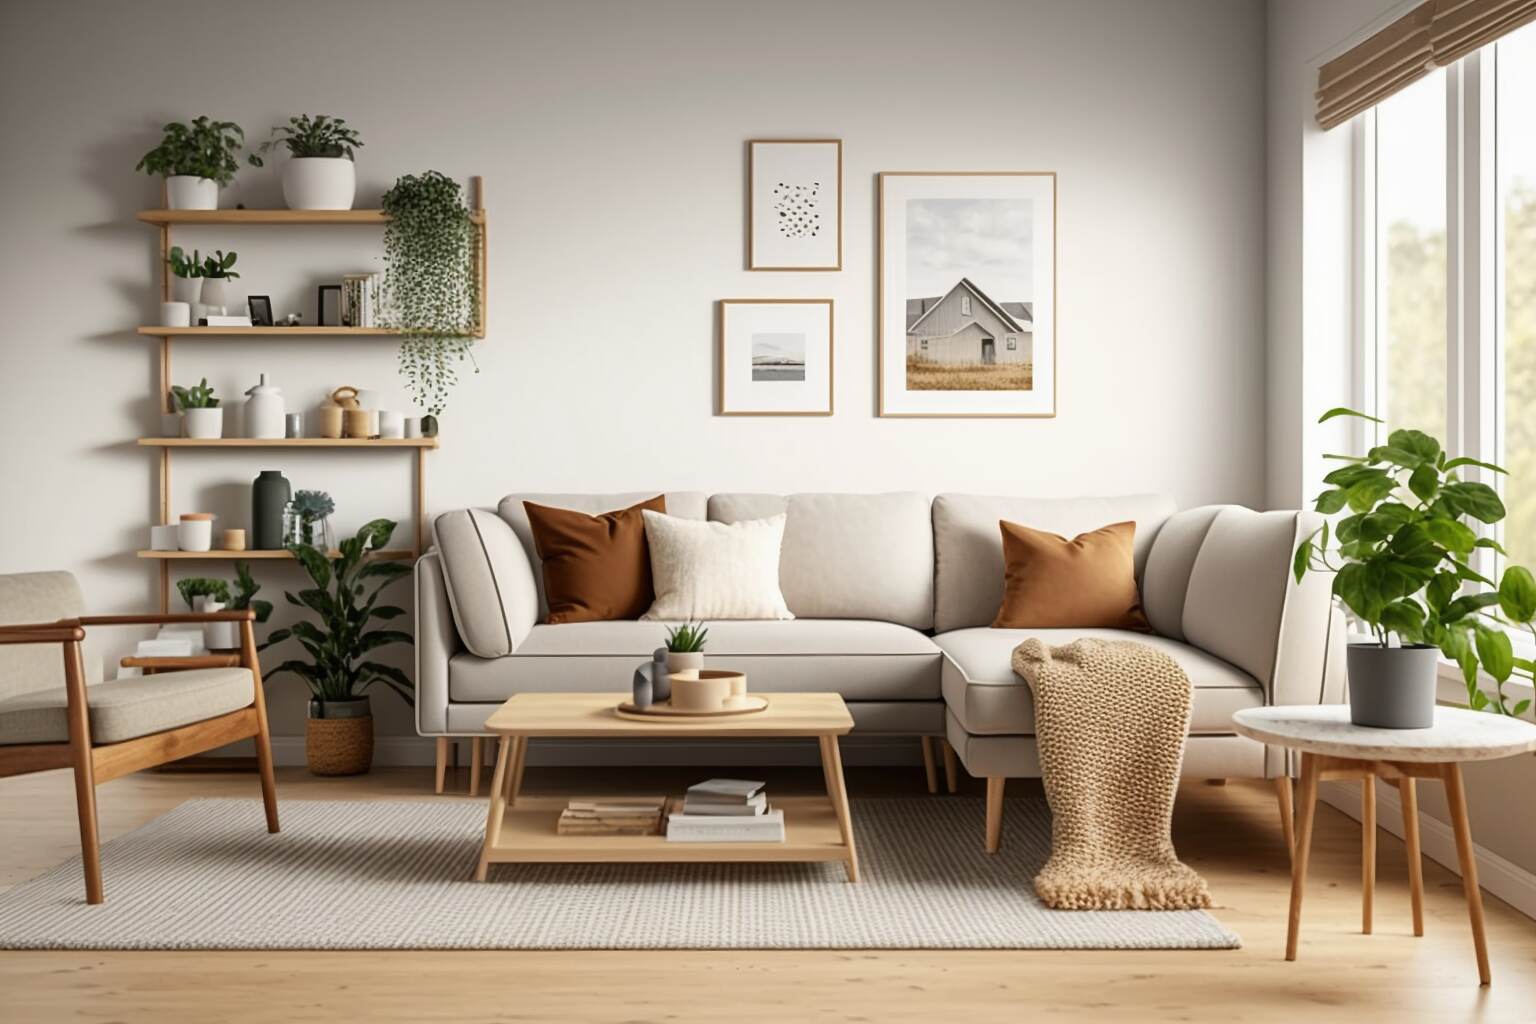 Monochromatic Living Room With Beige Walls